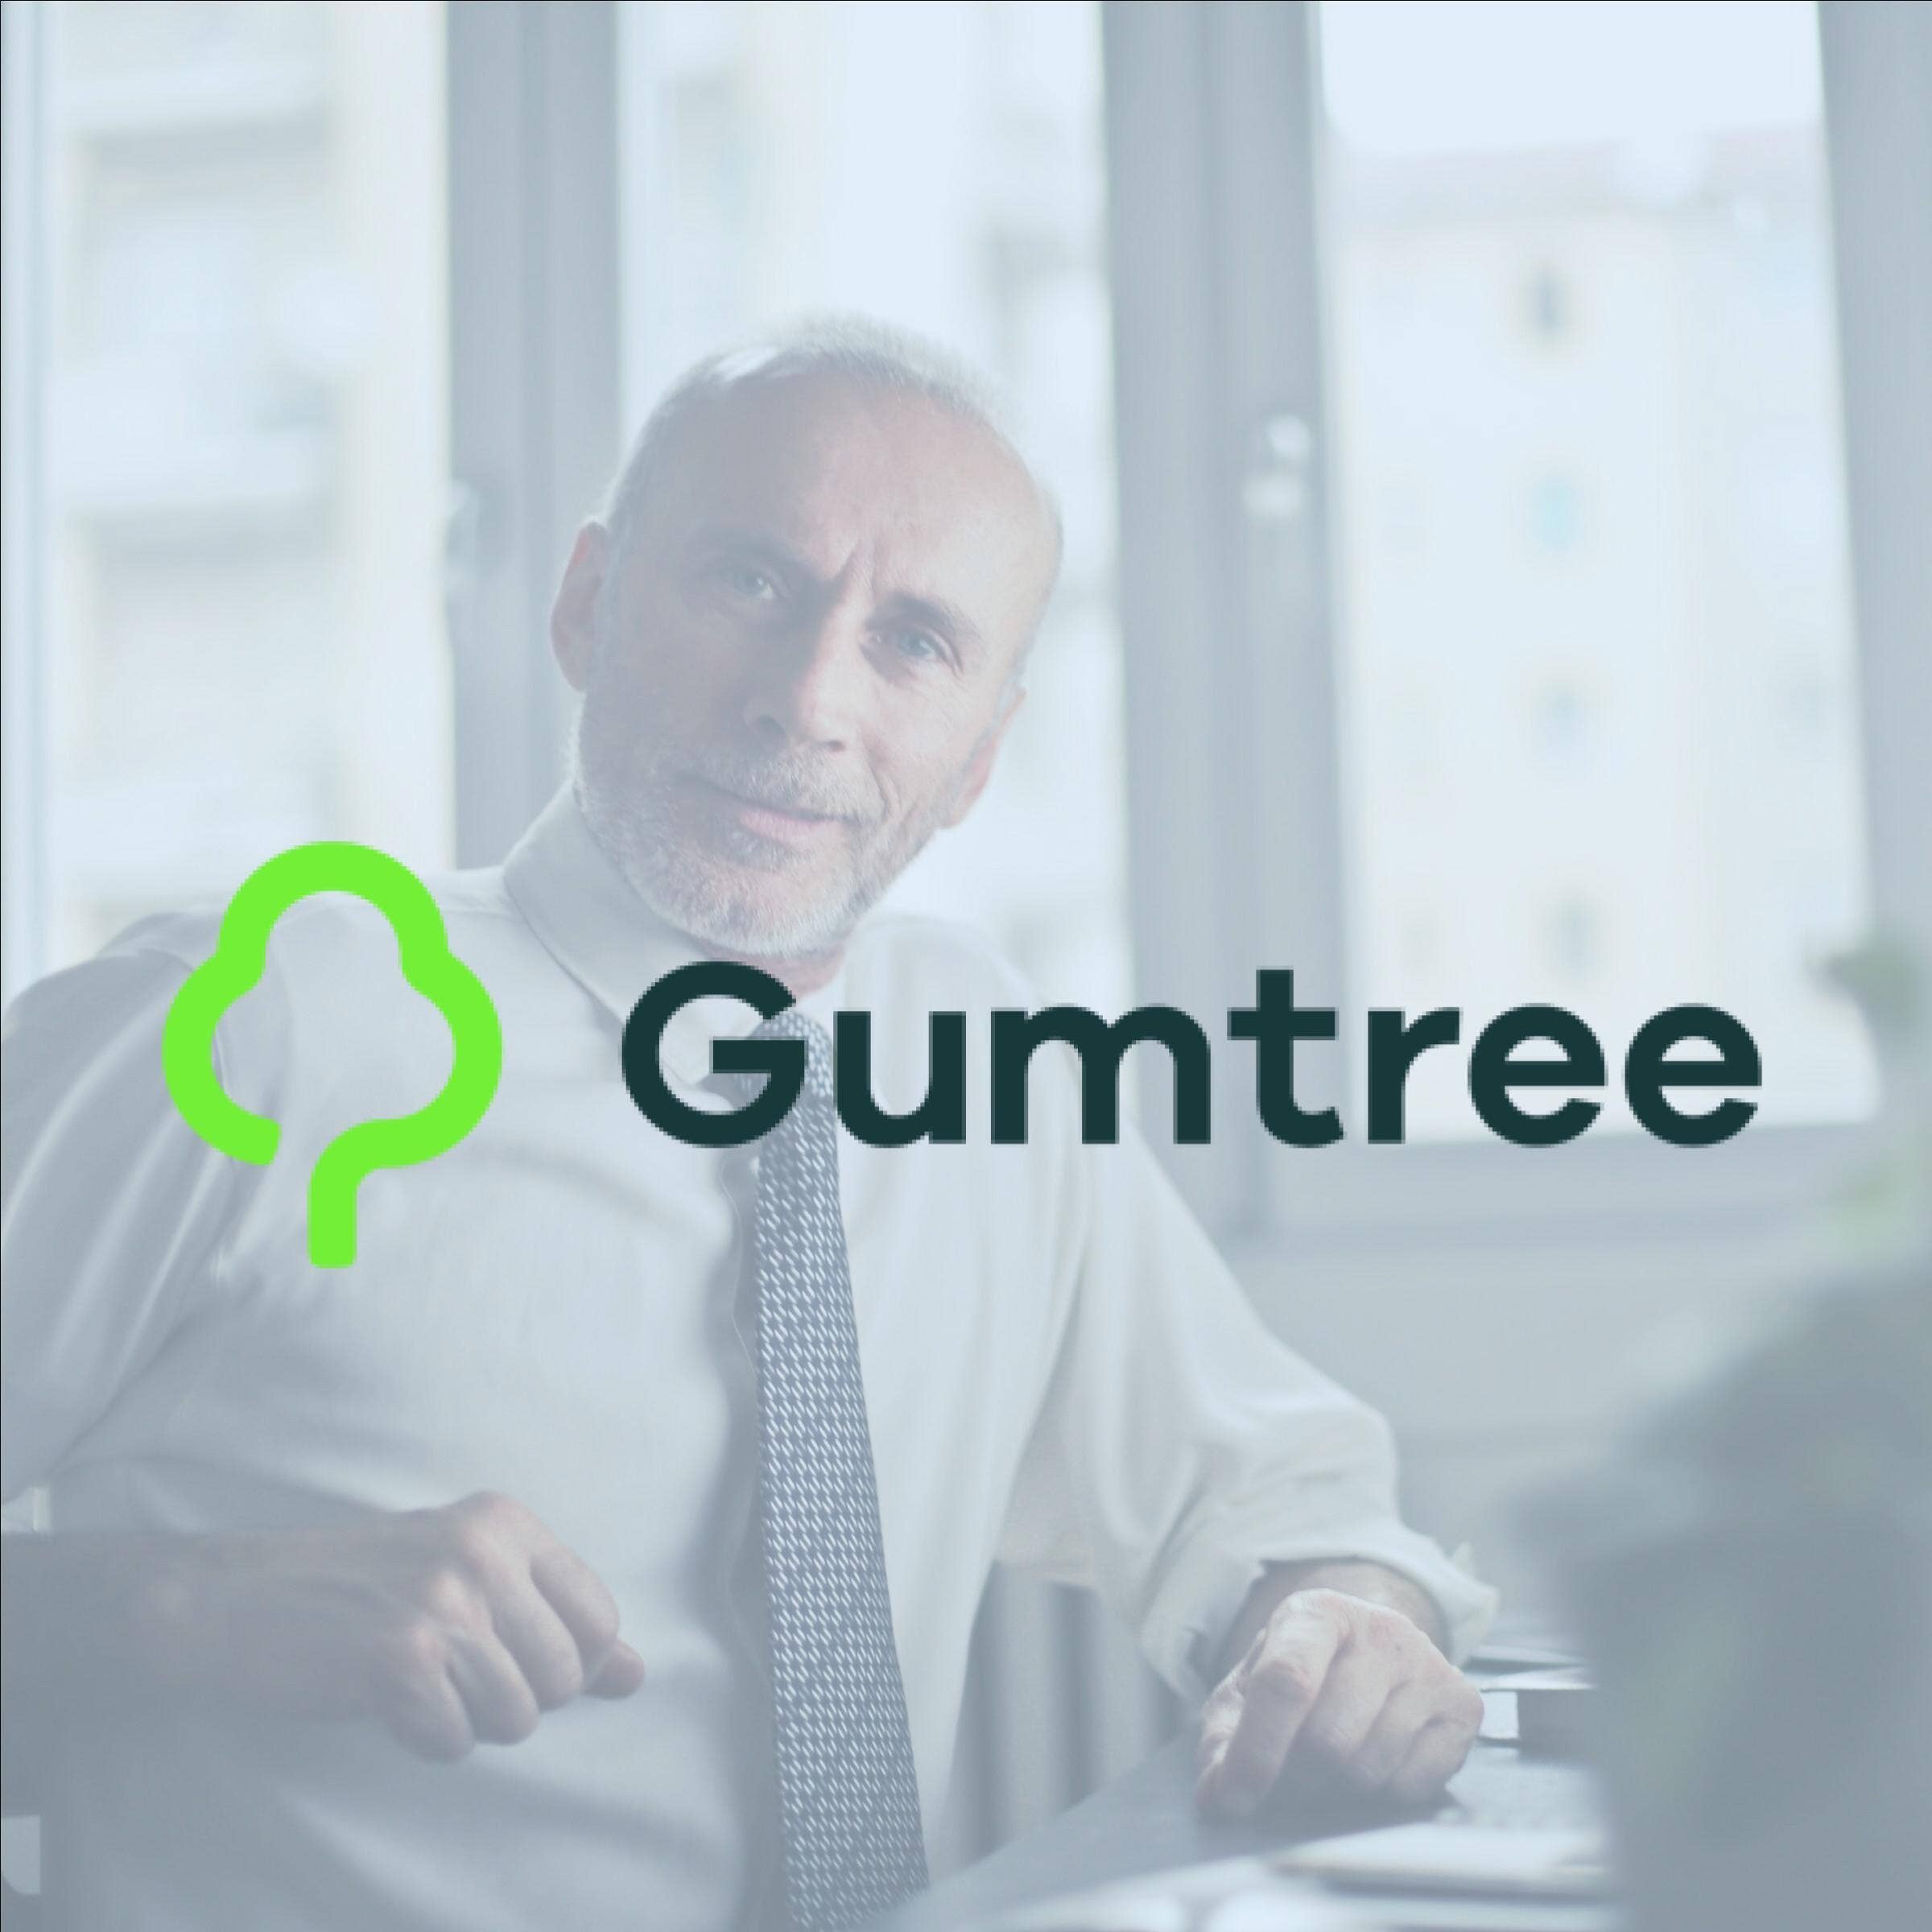 How long does gumtree take to process ad?